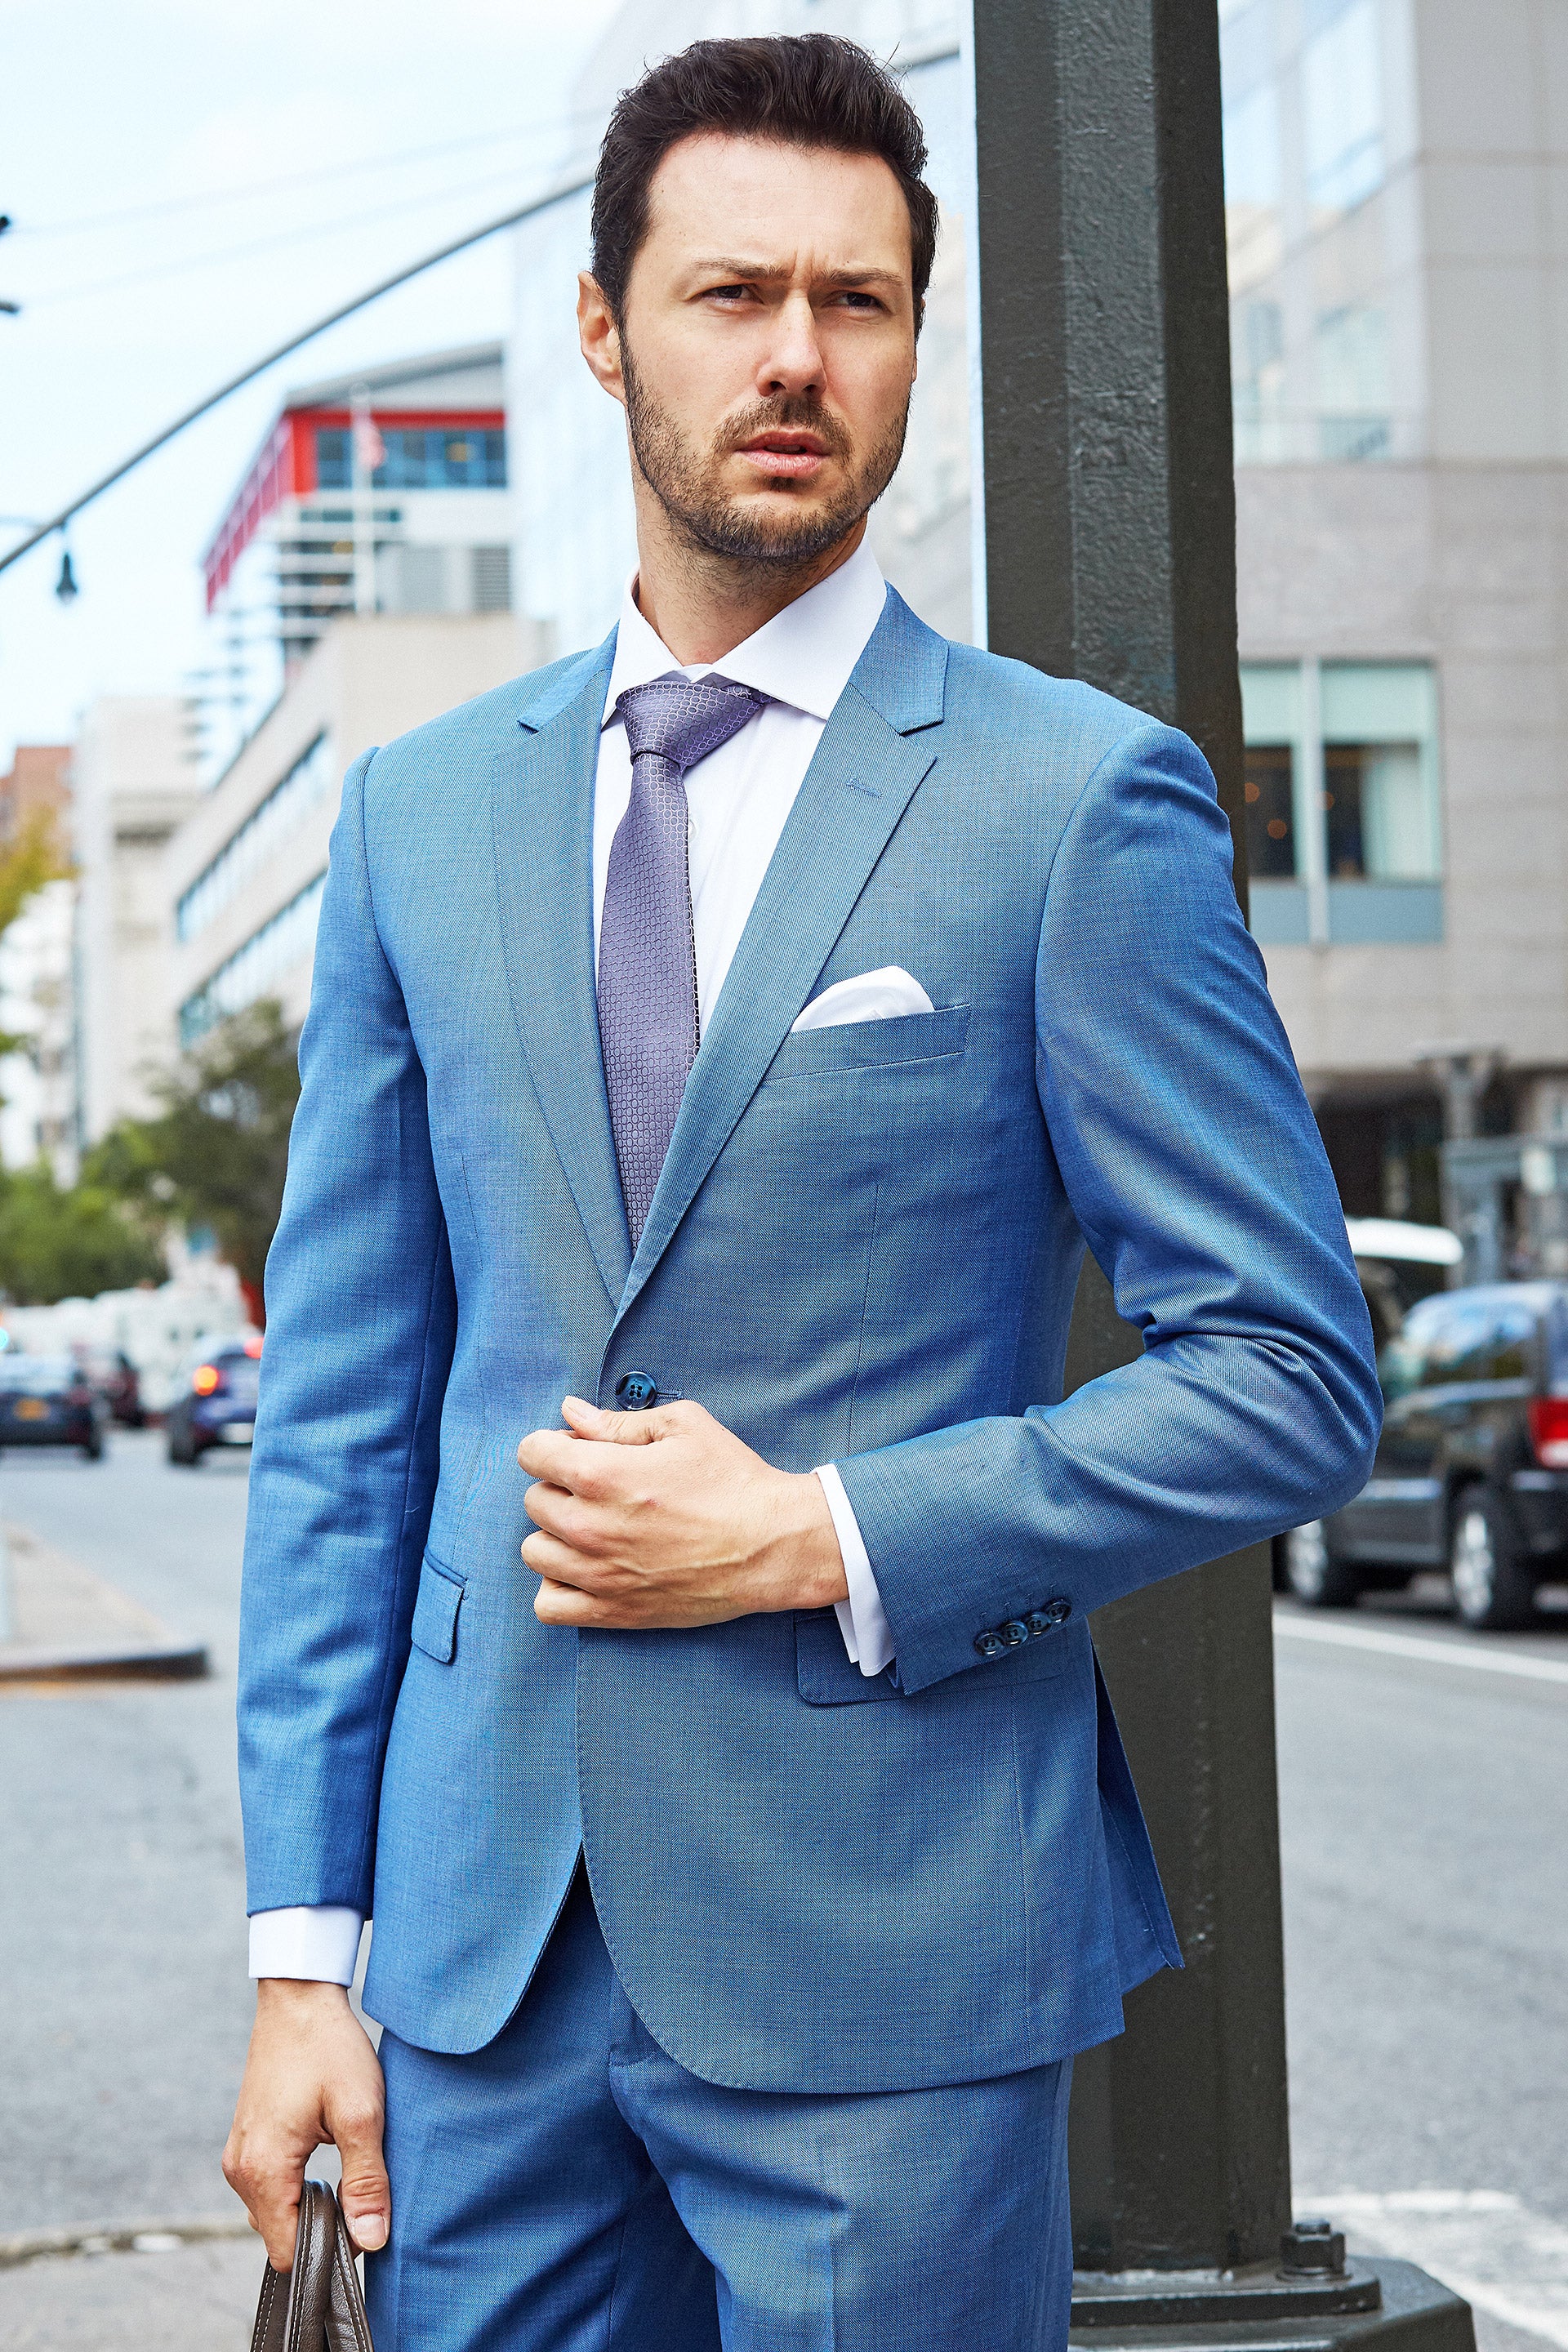 Can I wear a light colored suit all year long? - The Suit Spot